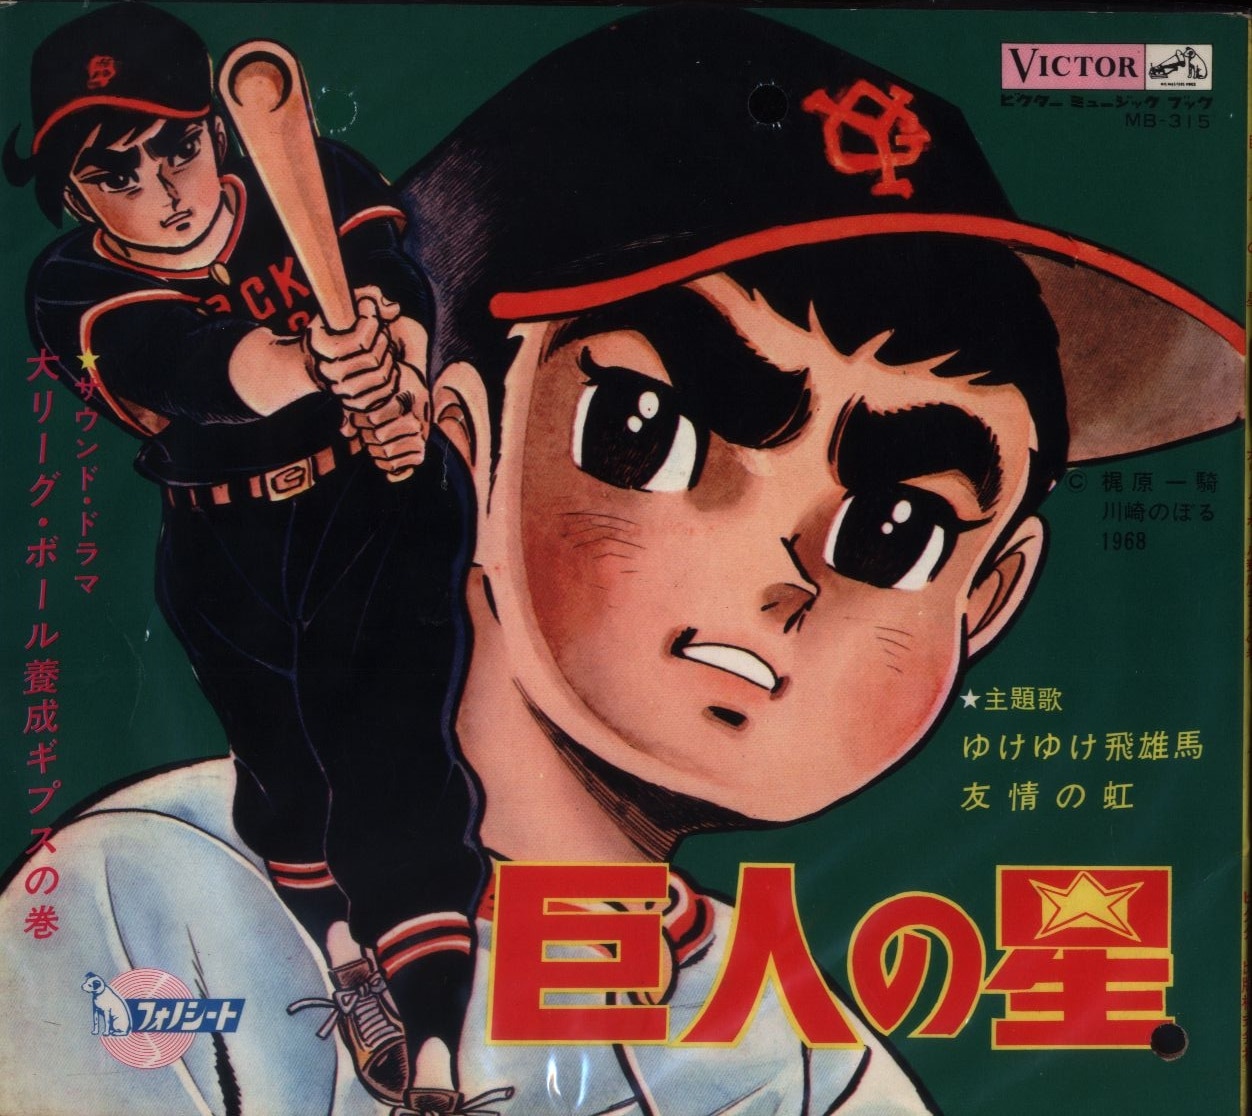 Victor Victor Music Book 315 Mb Kyojin No Hoshi Star Of The Giants Major League Ball Training Cast Of Winding Mandarake Online Shop